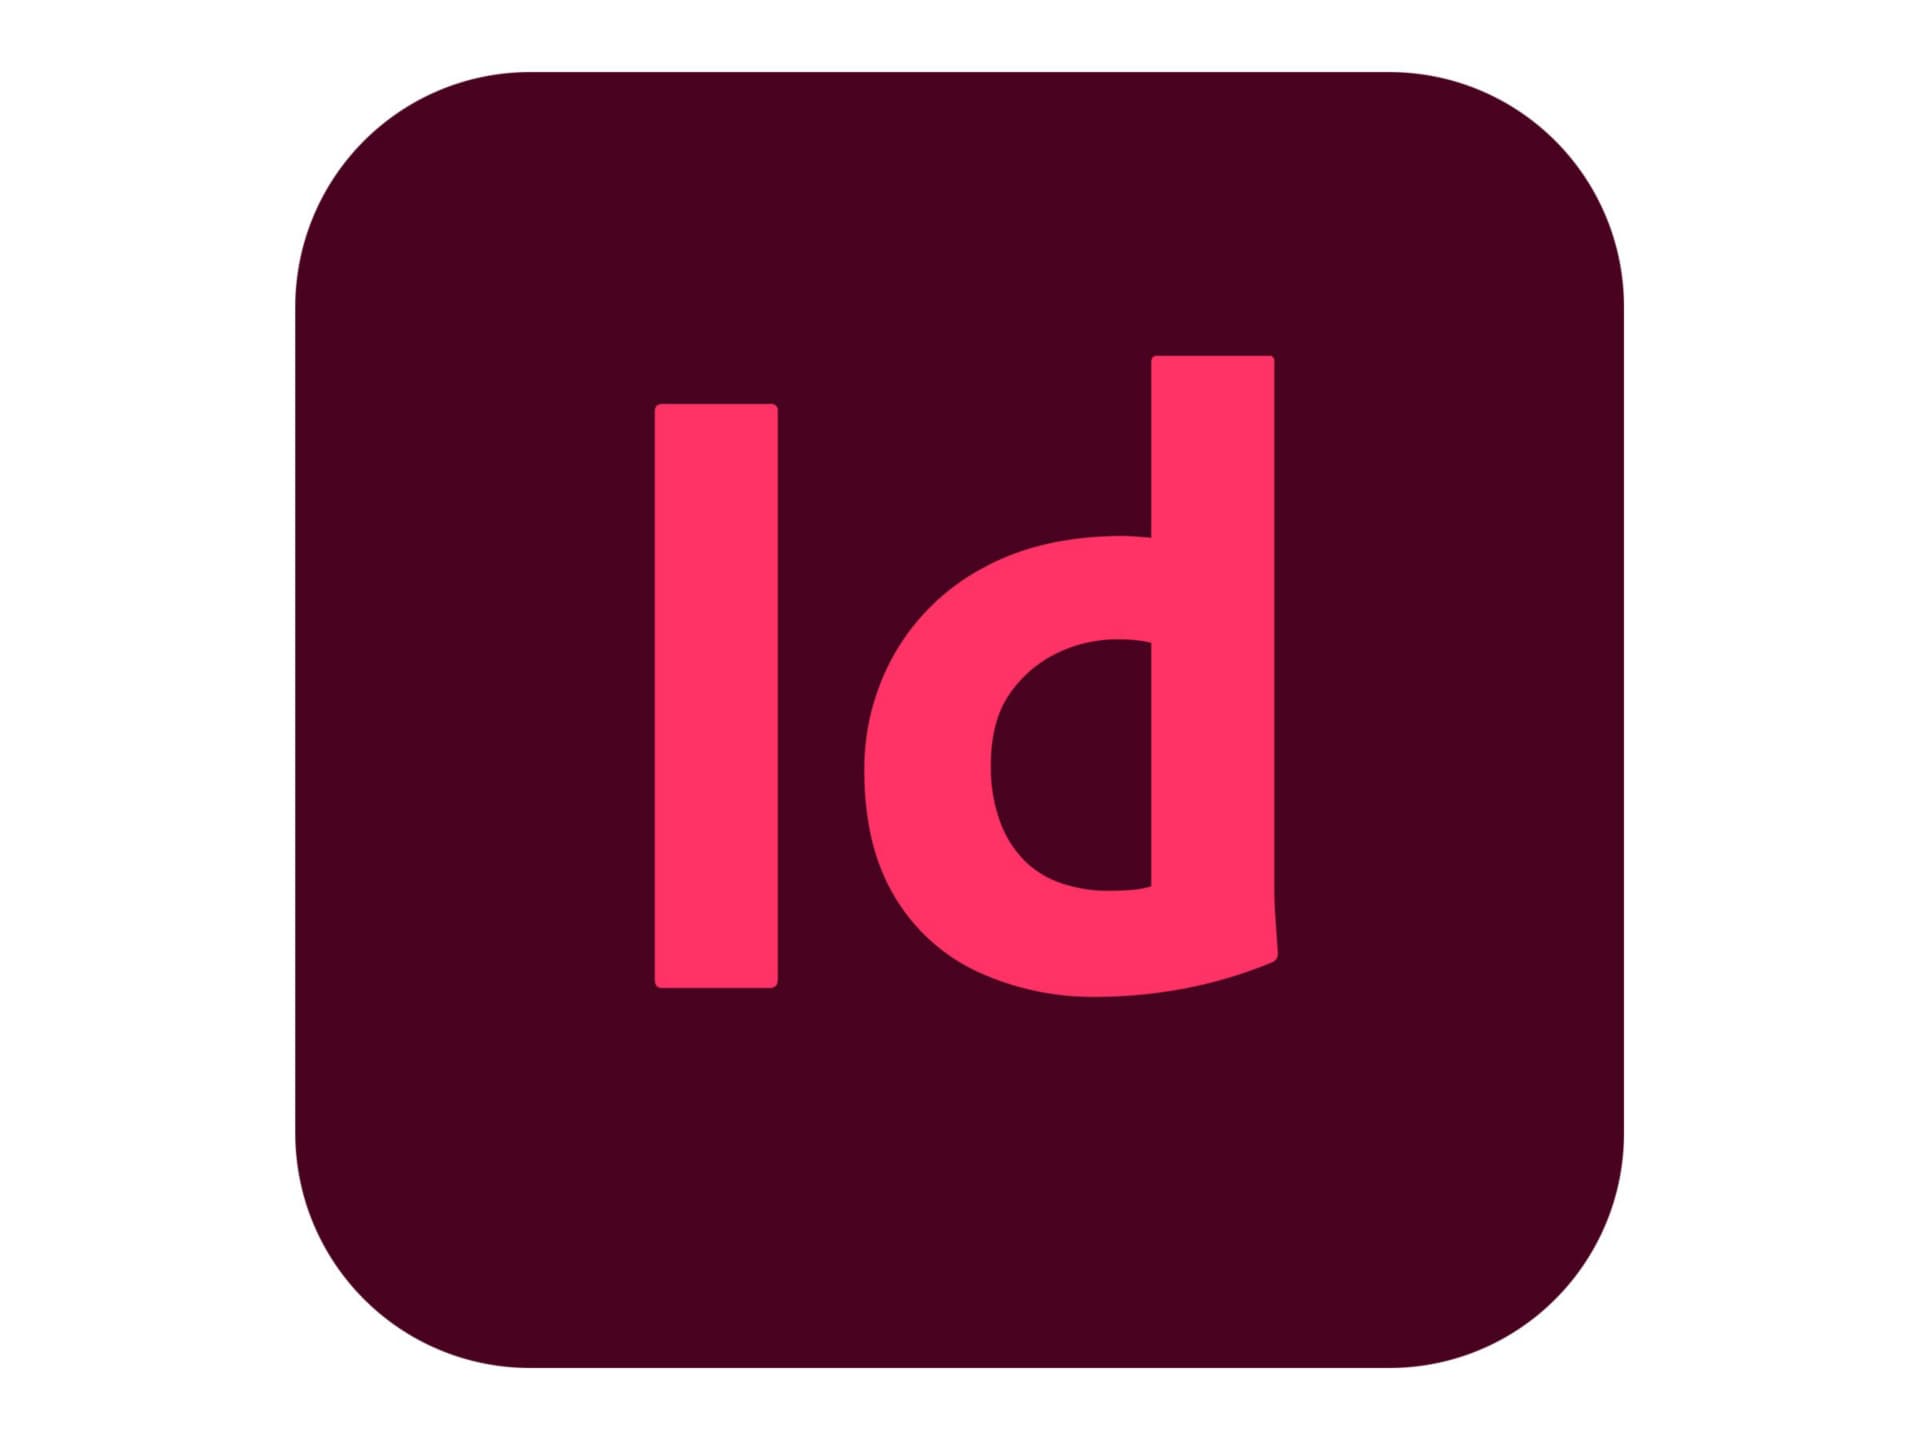 Adobe InDesign for teams - Subscription New - 1 user